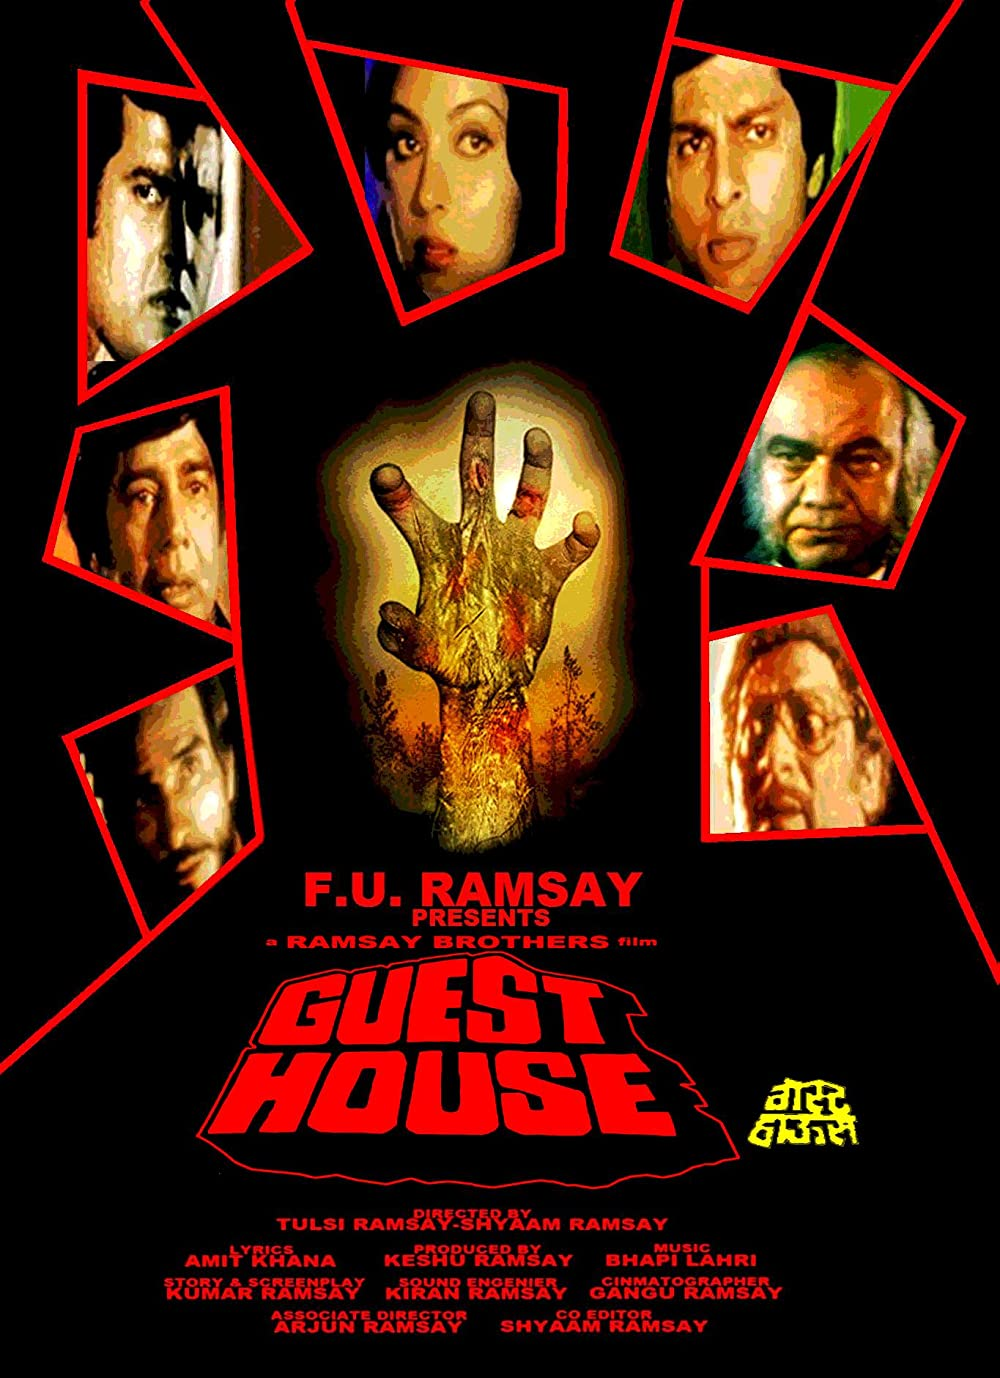 Ramsay Brothers horror movies guest house 1980 poster